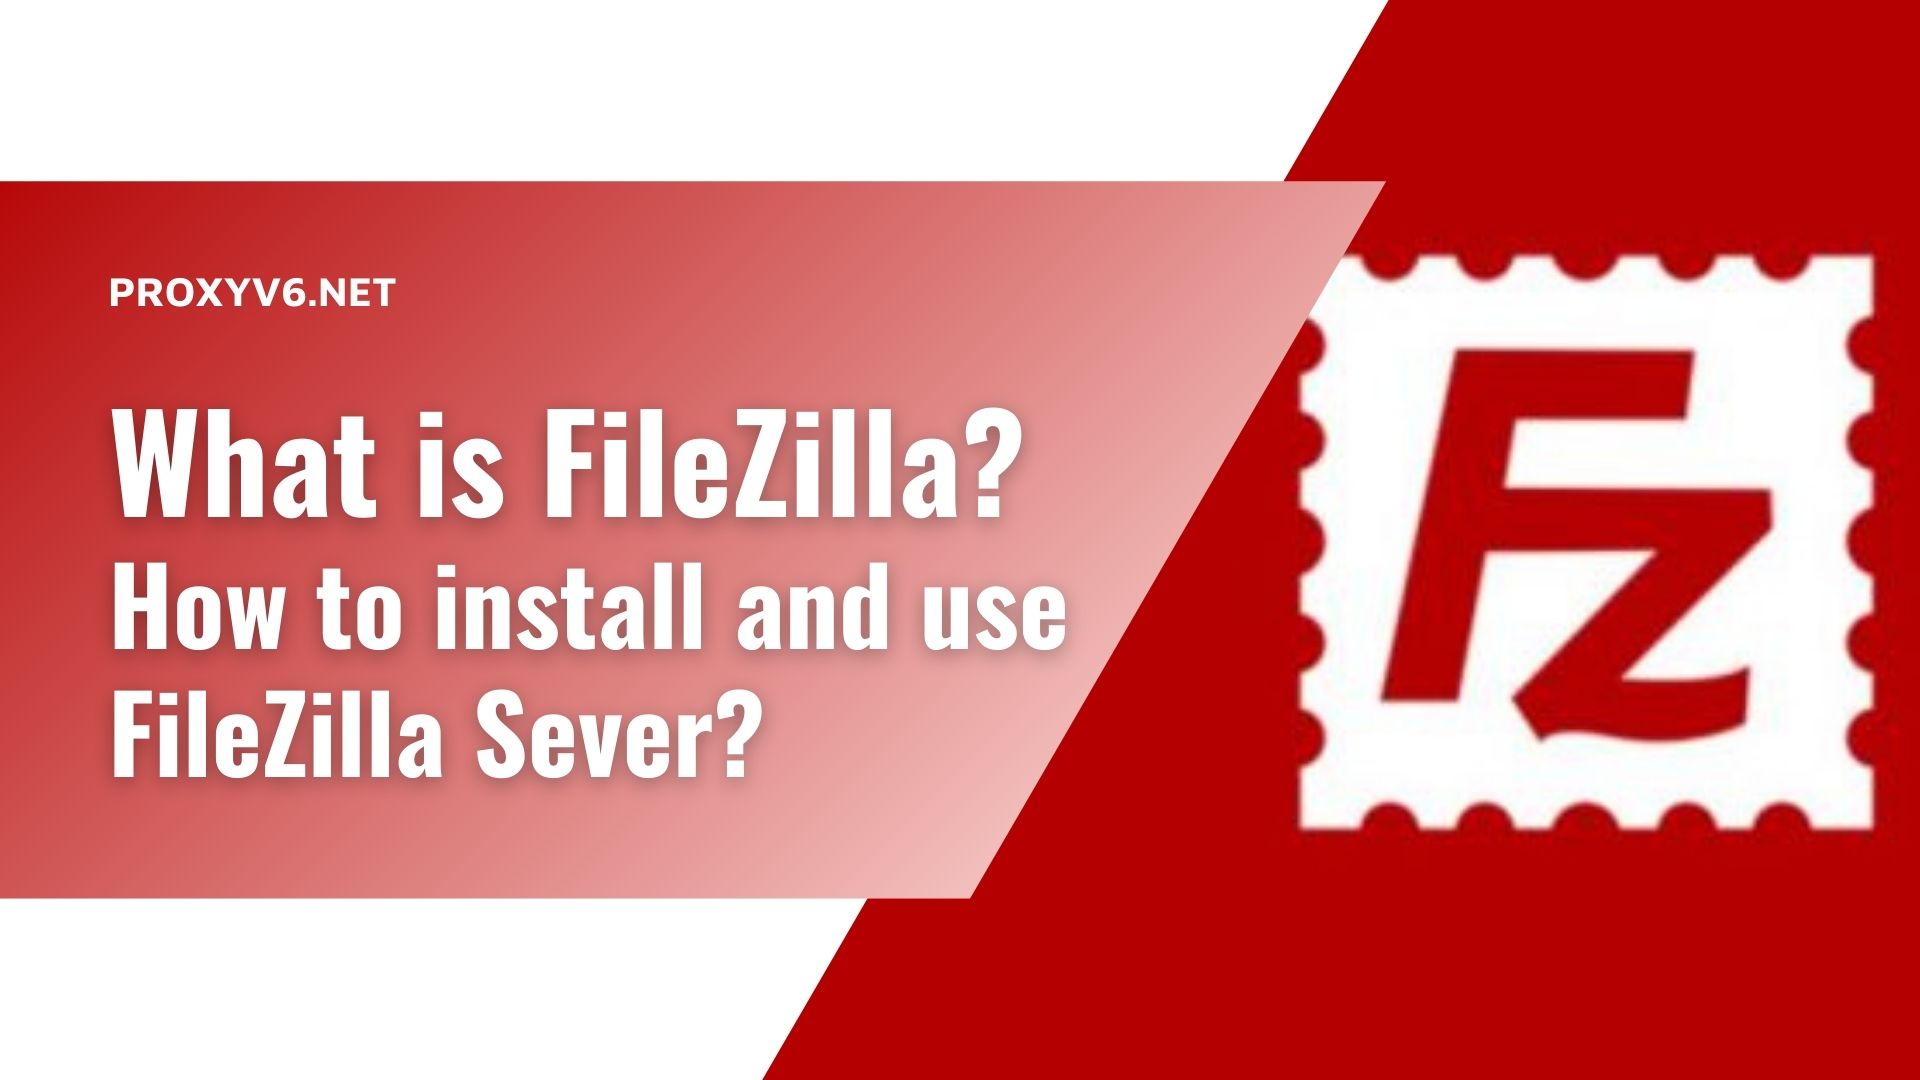 What is FileZilla? How to install and use FileZilla Sever